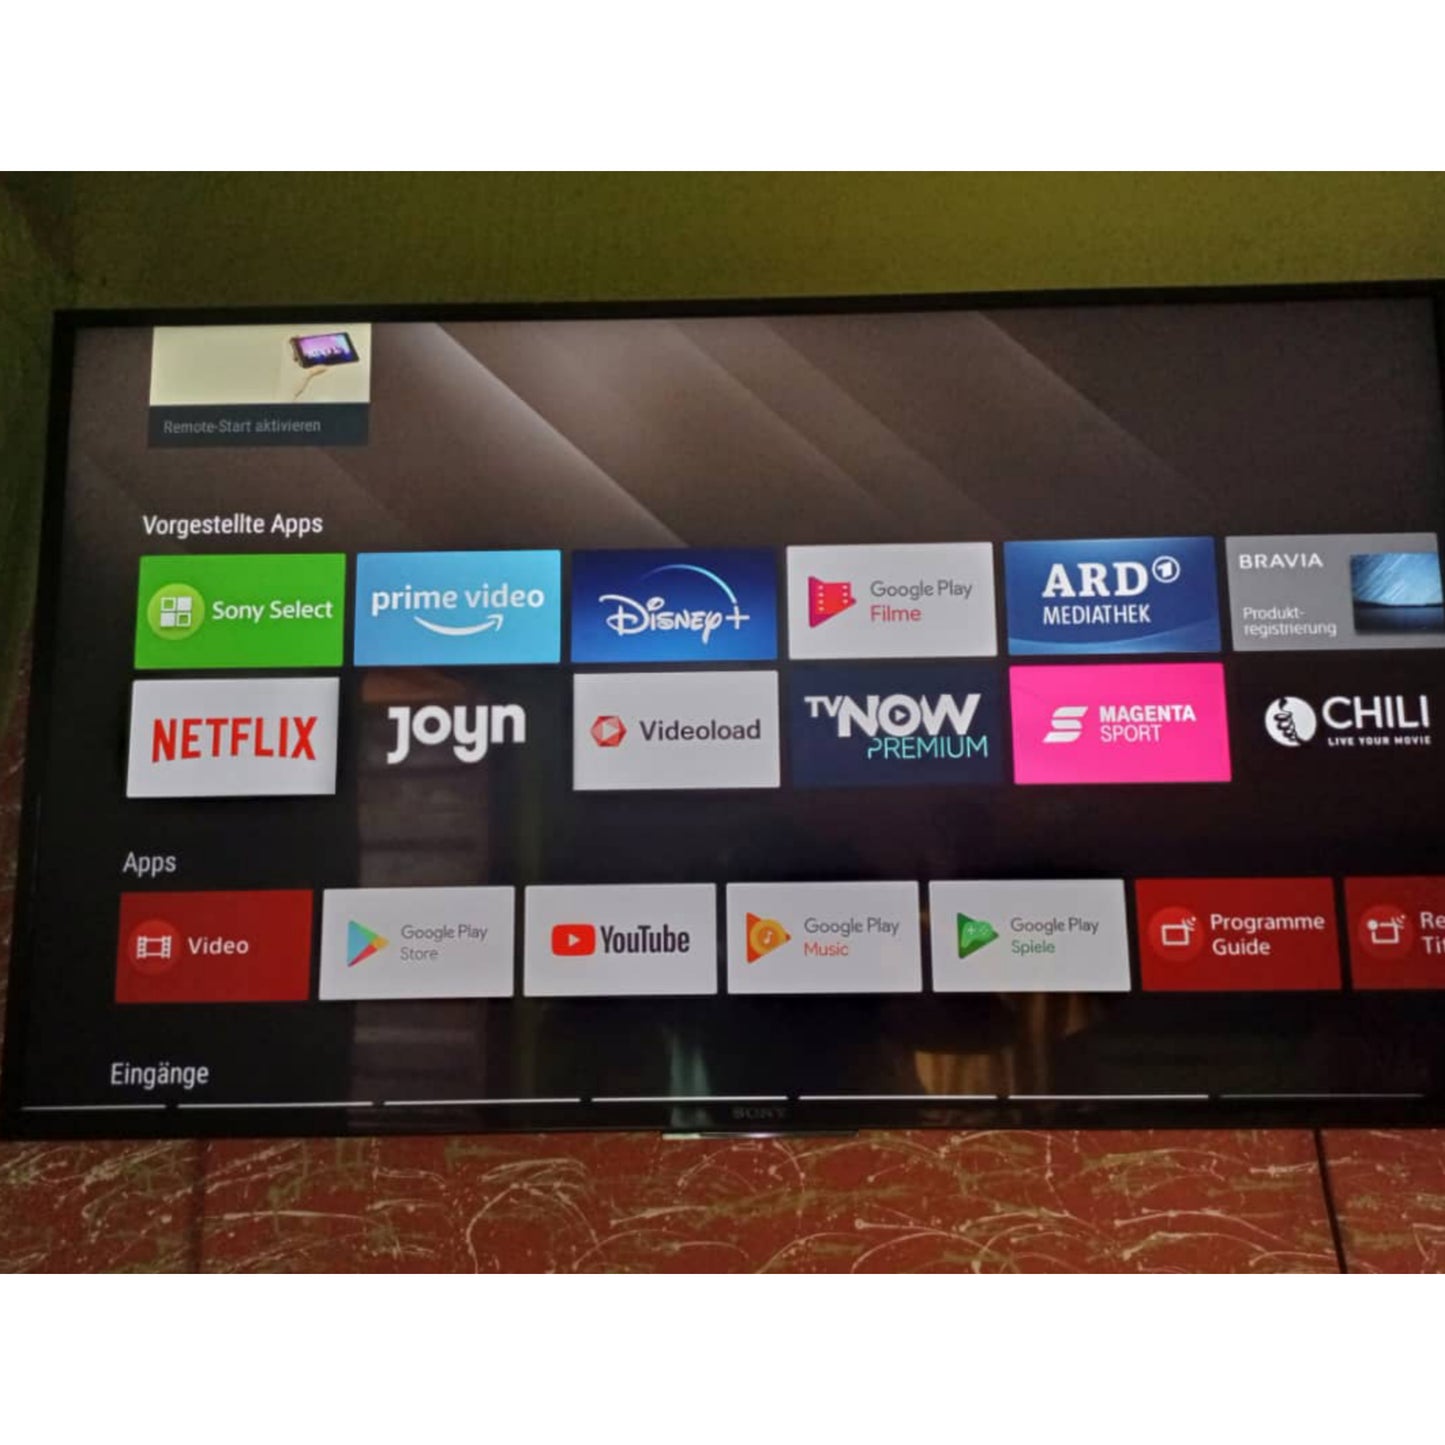 49 inch Sony Android 4K Smart LED TV with NETFLIX, YouTube and Amazon prime